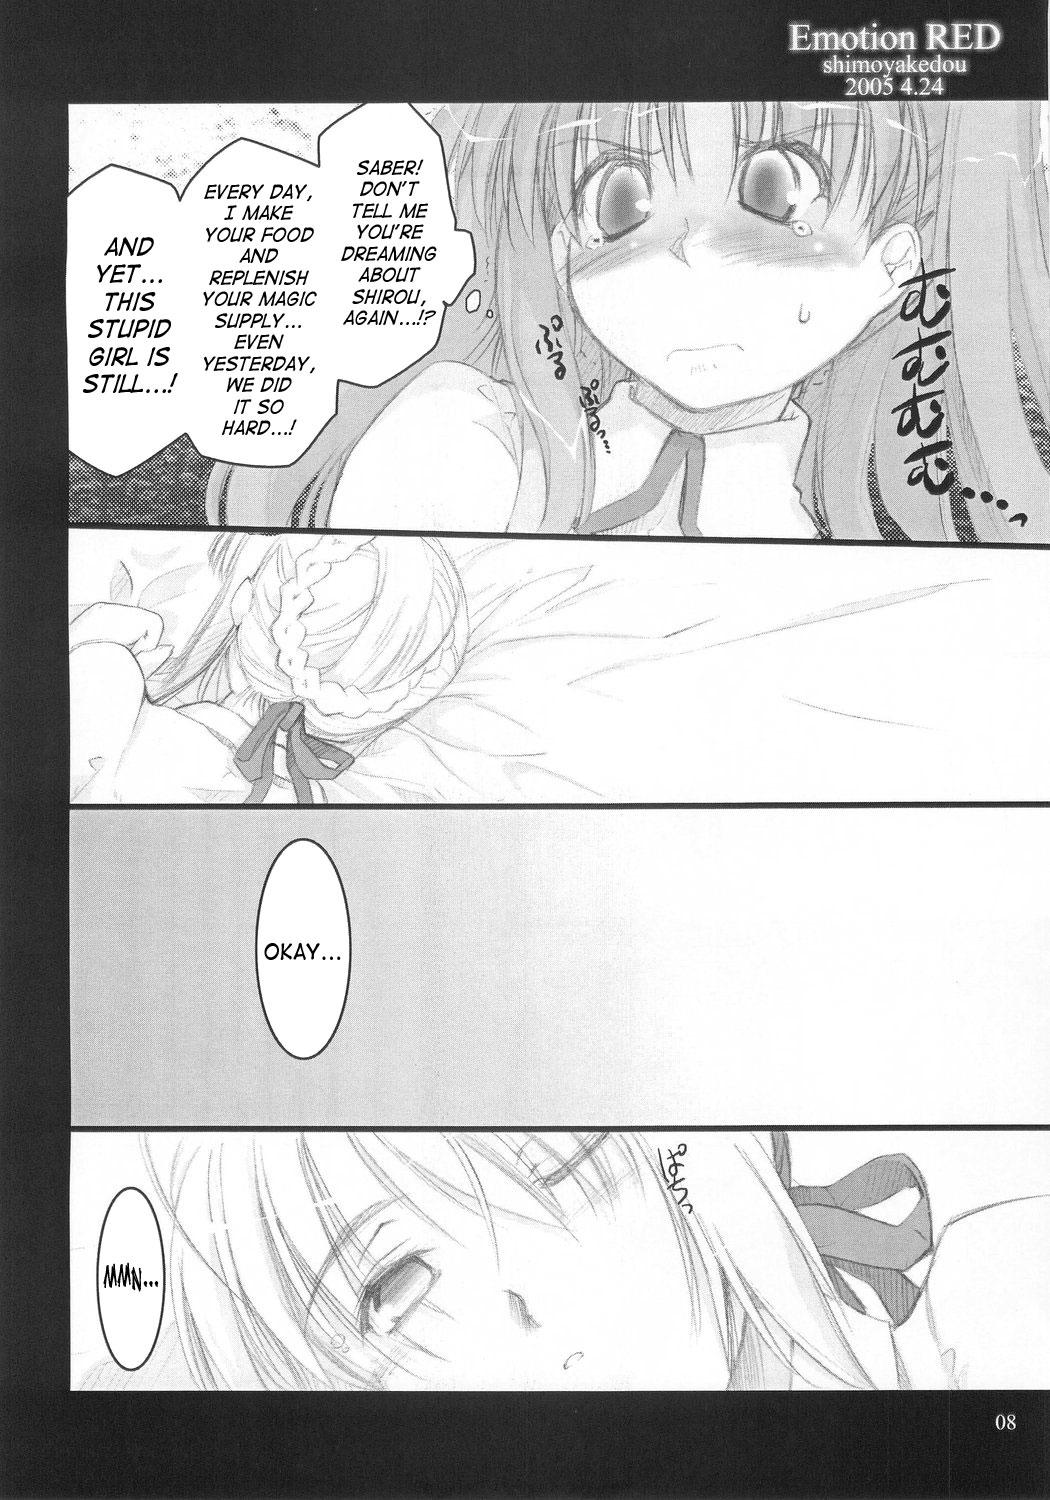 Teensex Emotion RED - Fate stay night Gaysex - Page 7